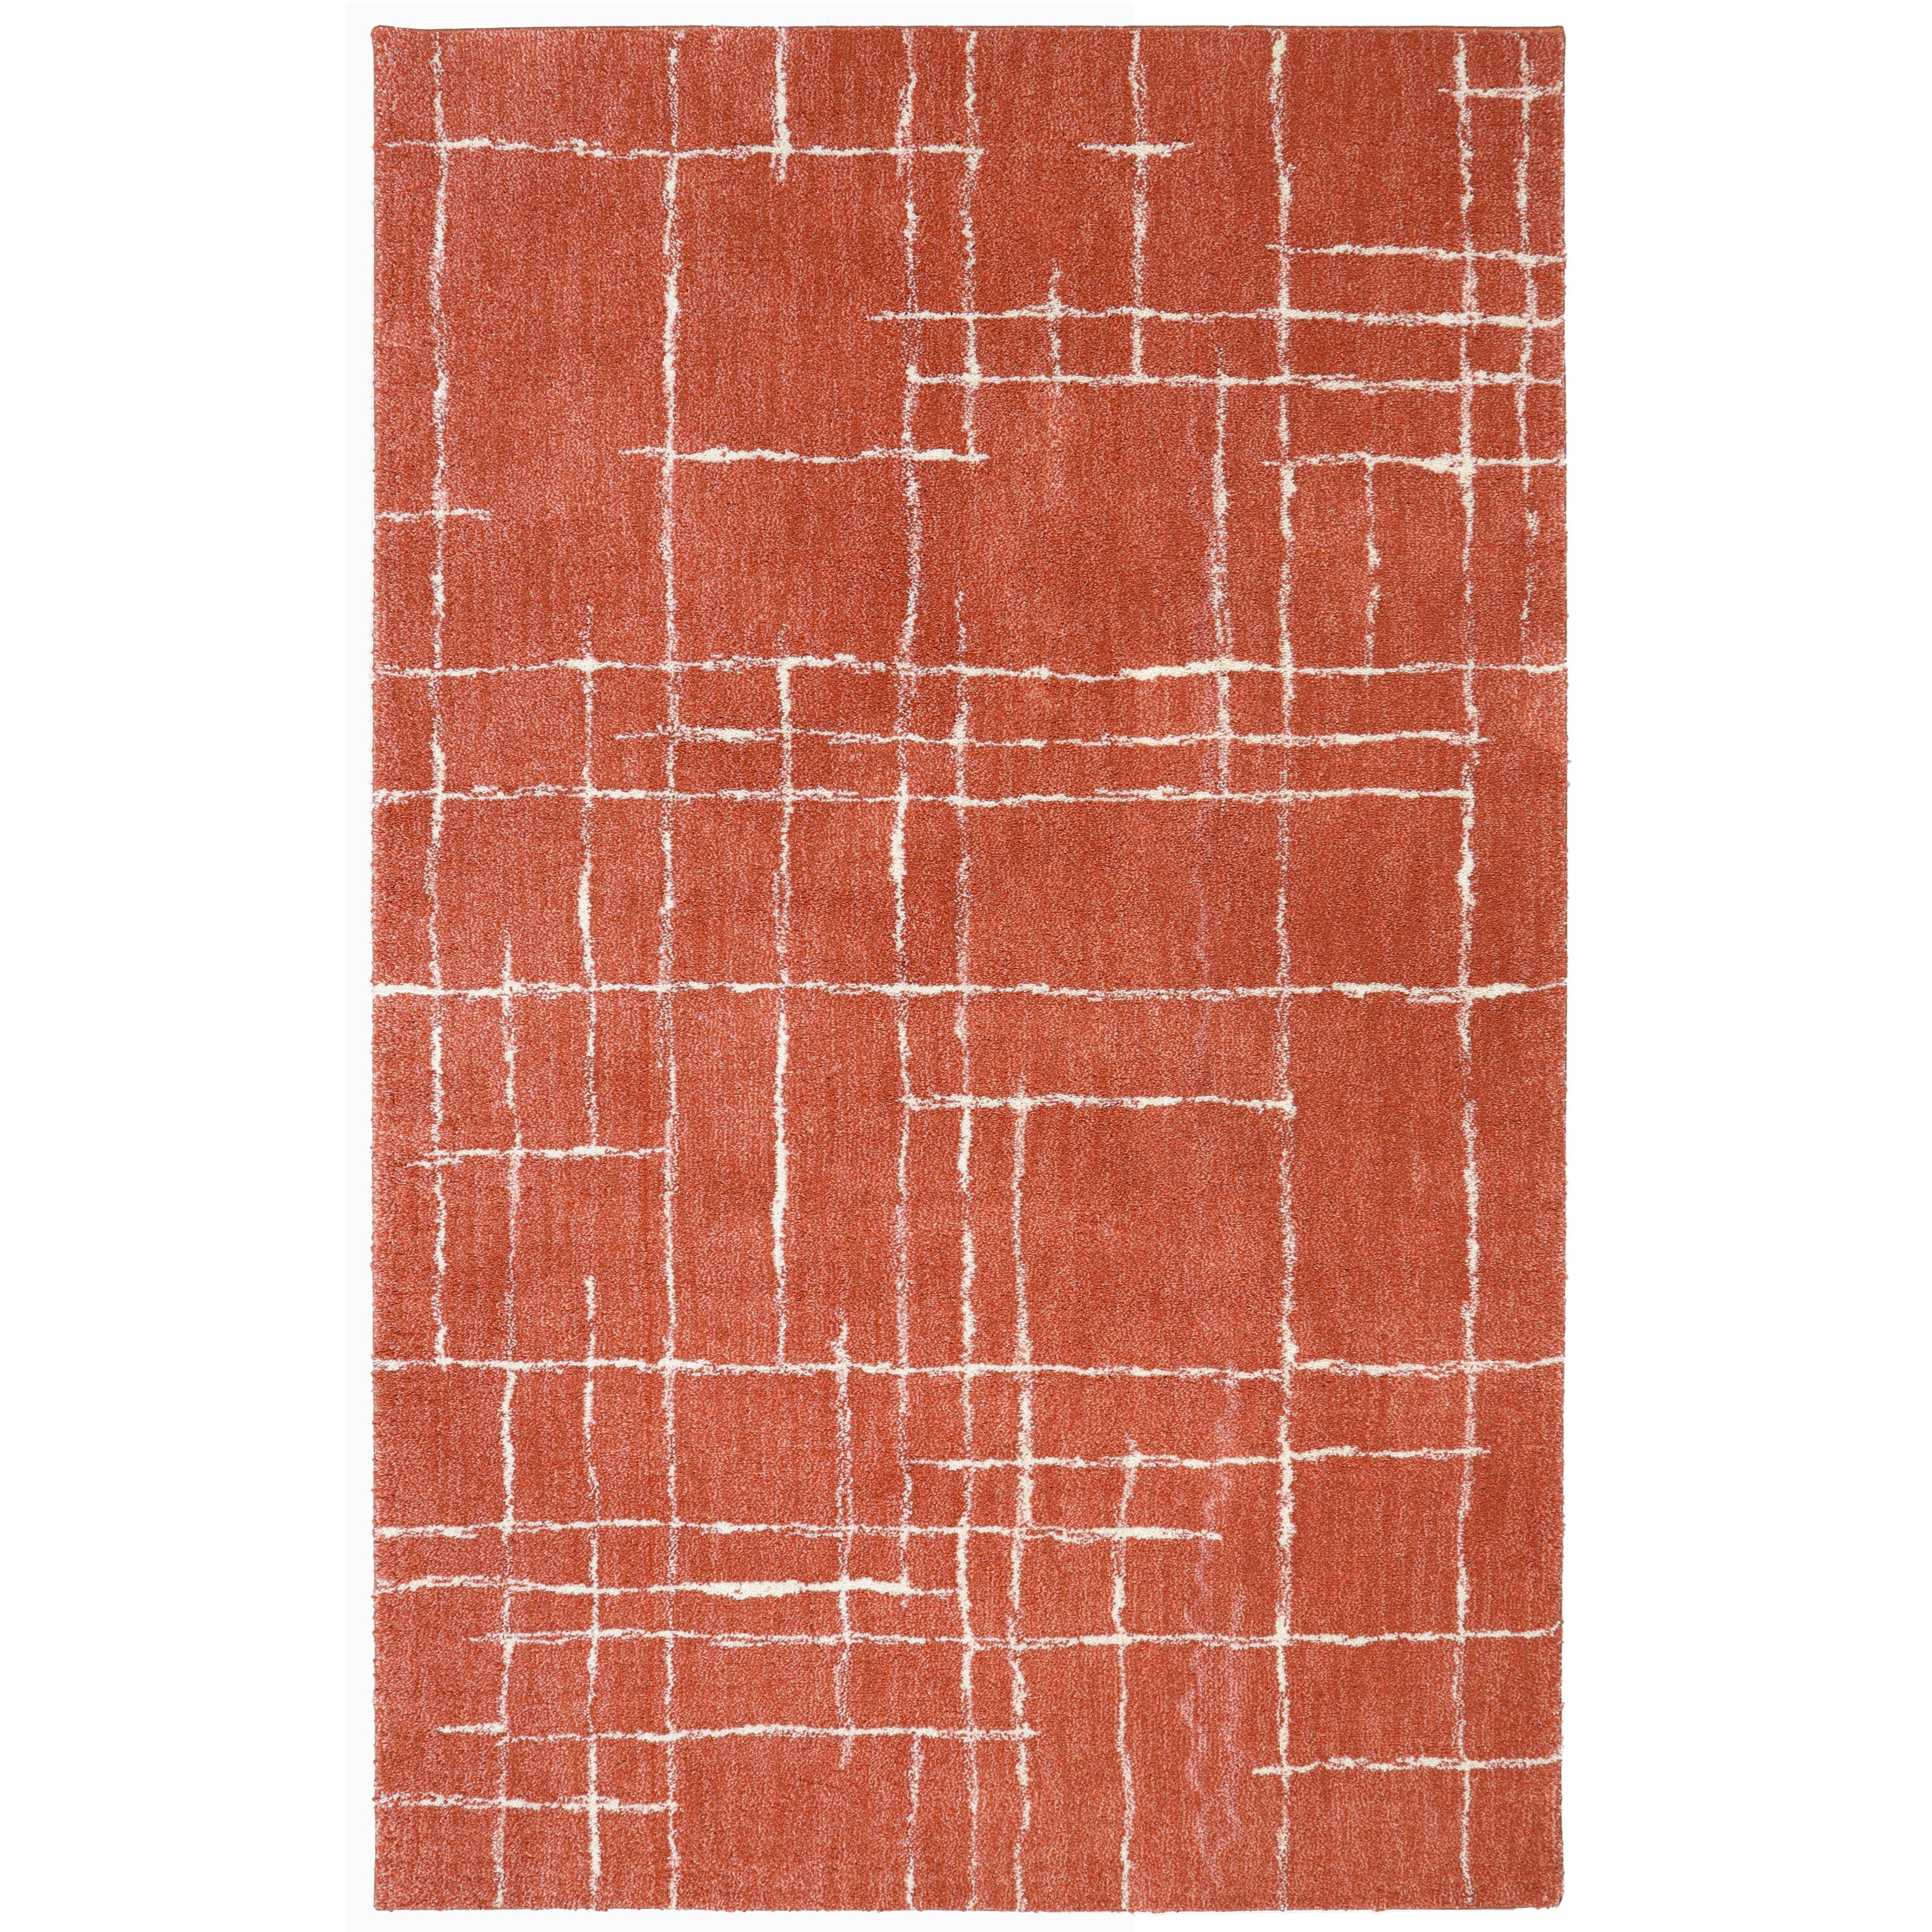 10'x14' Chatham Coral Area Rug